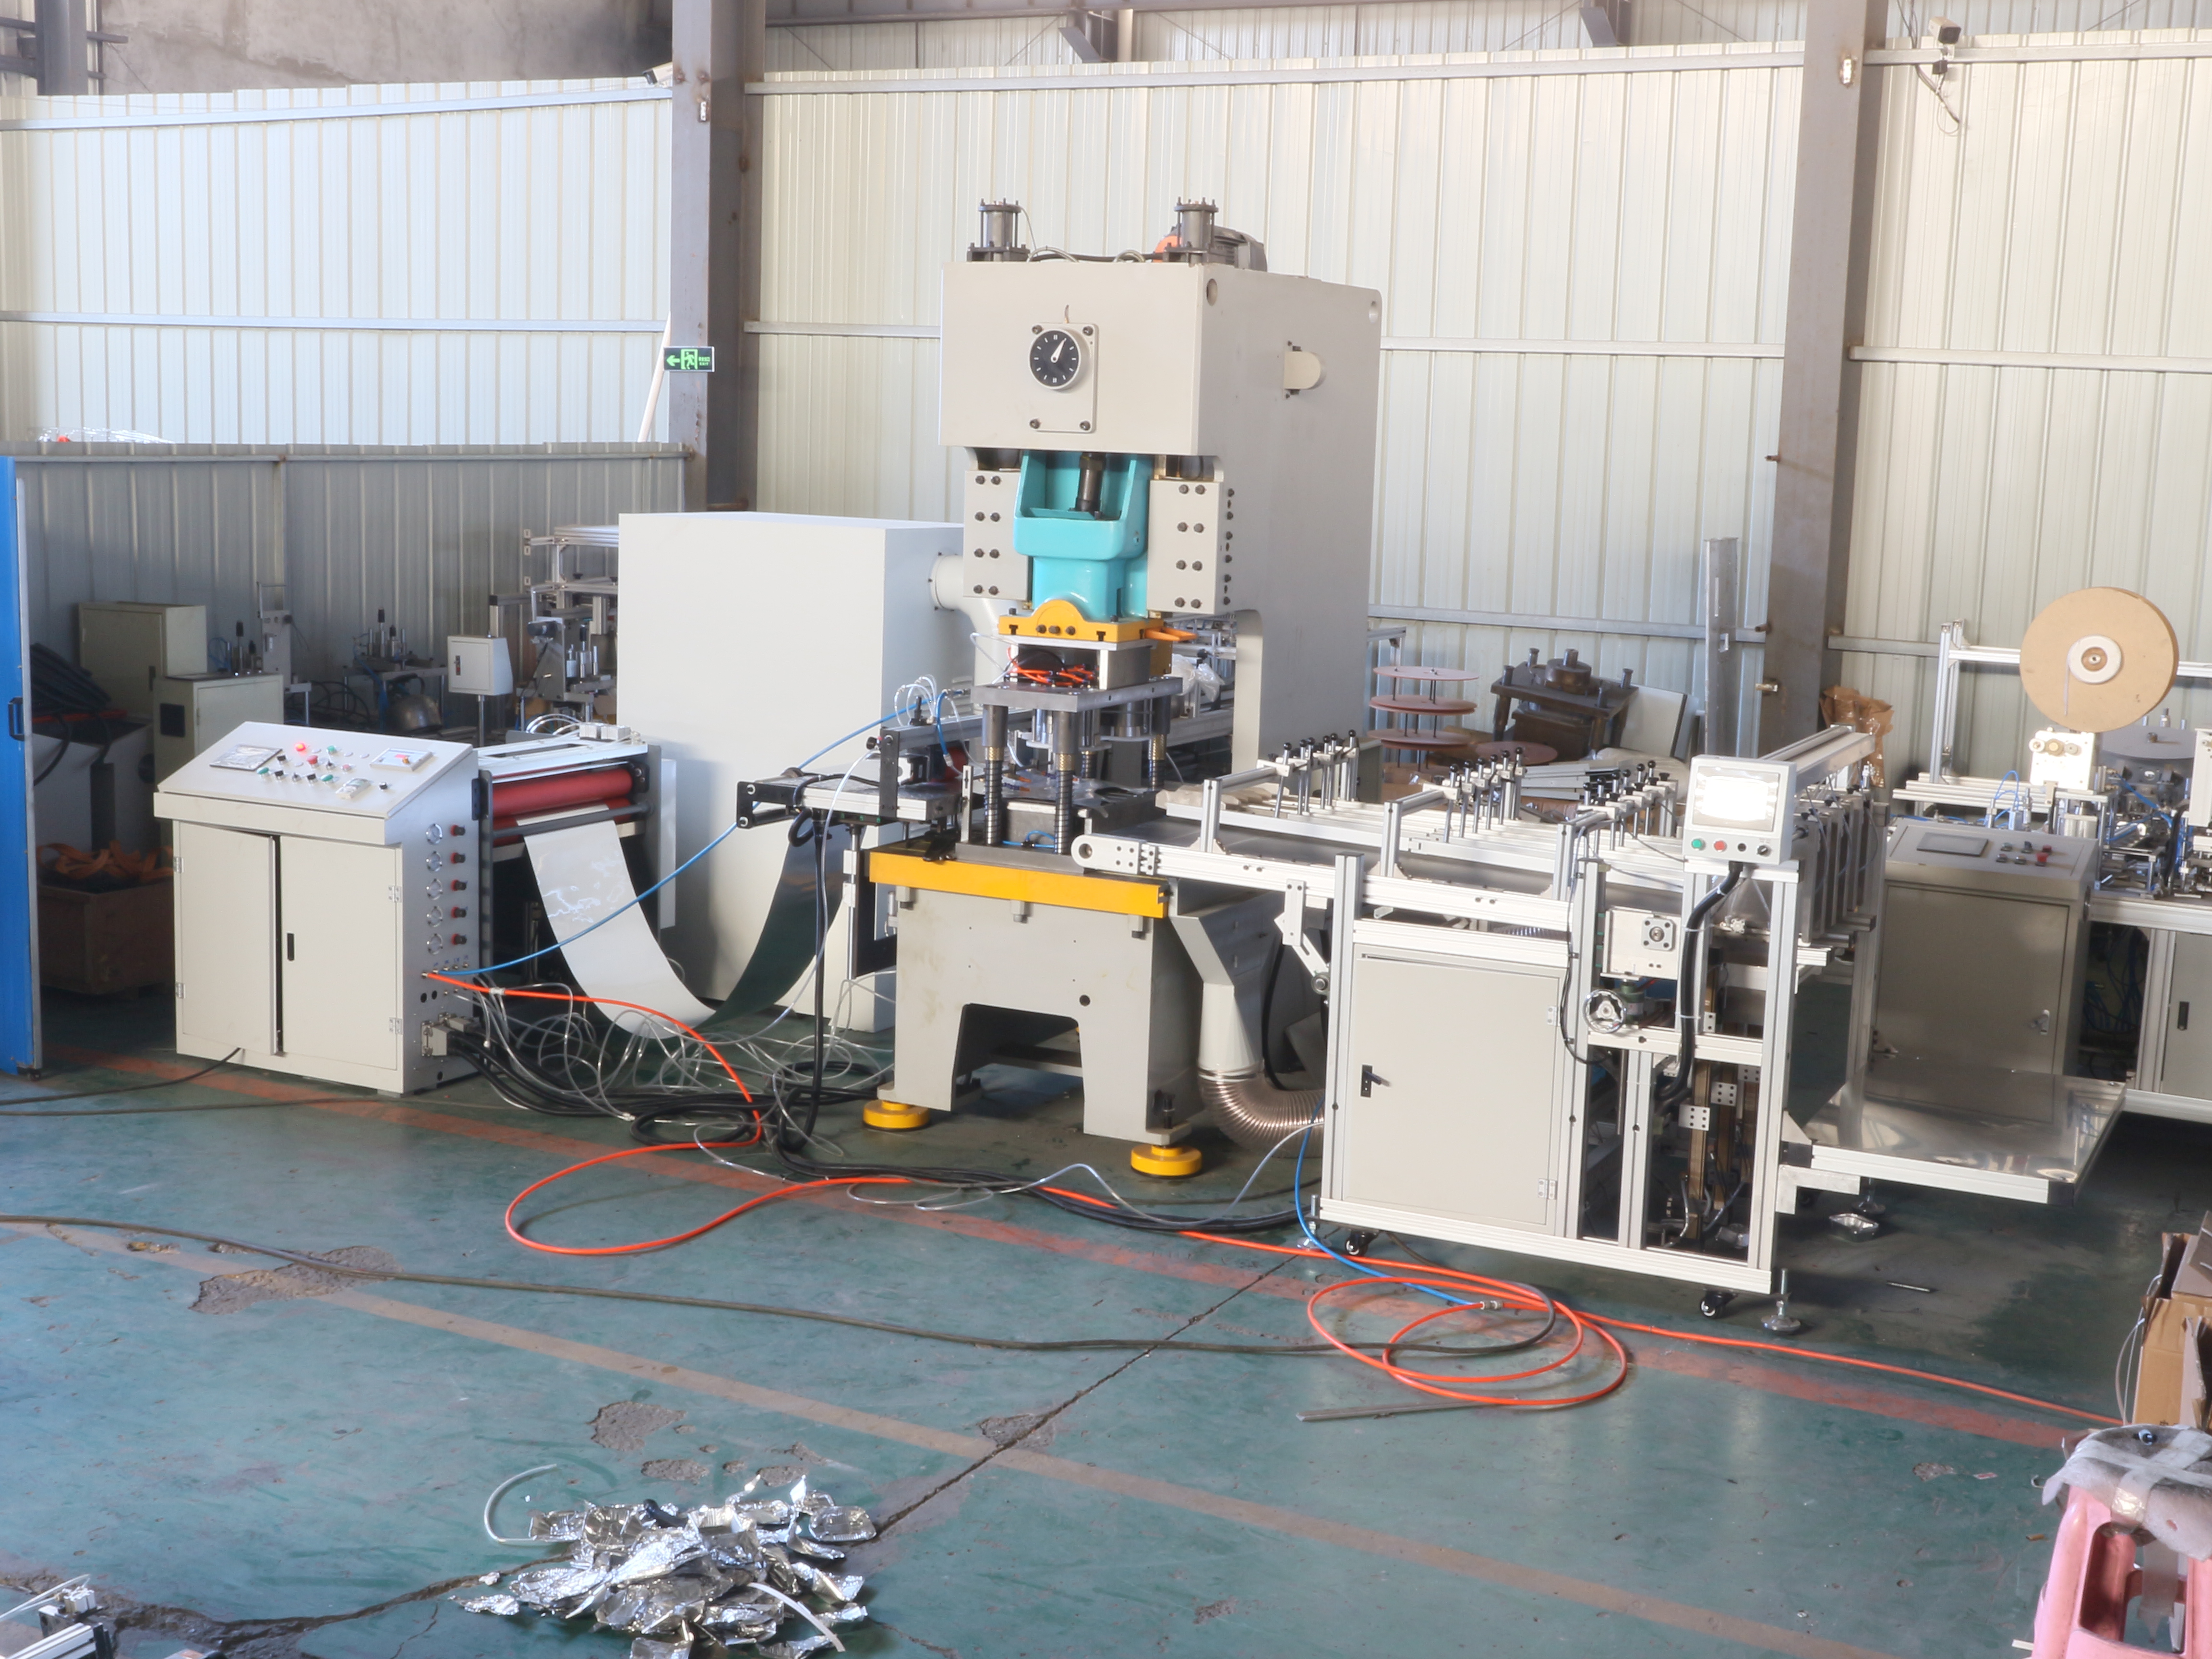 Automatic Aluminum Foil Container Making Machine Line AF-45AT